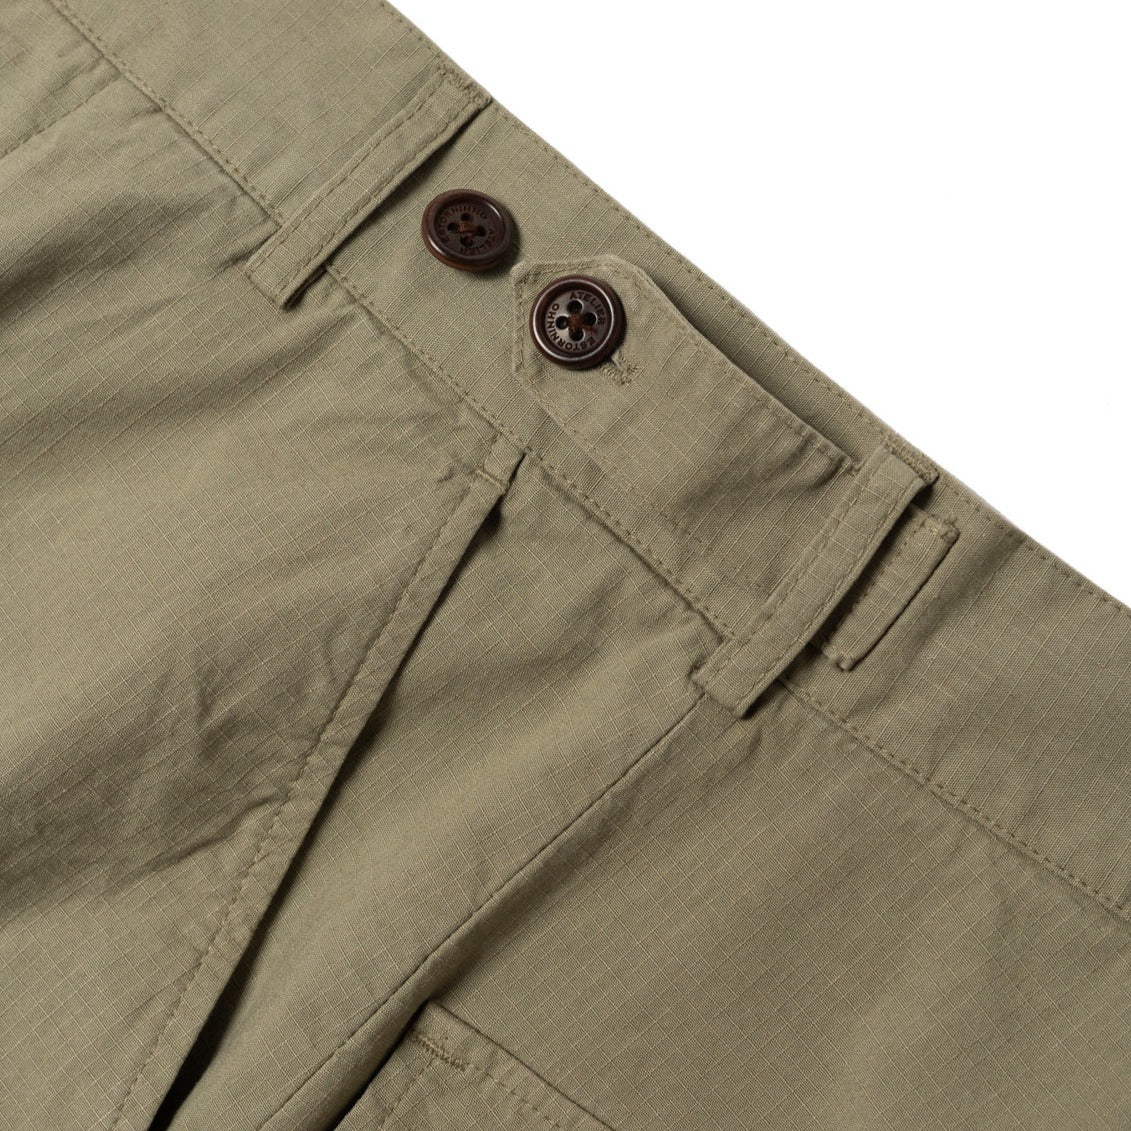 Standard Issue Tropical Combat Trousers